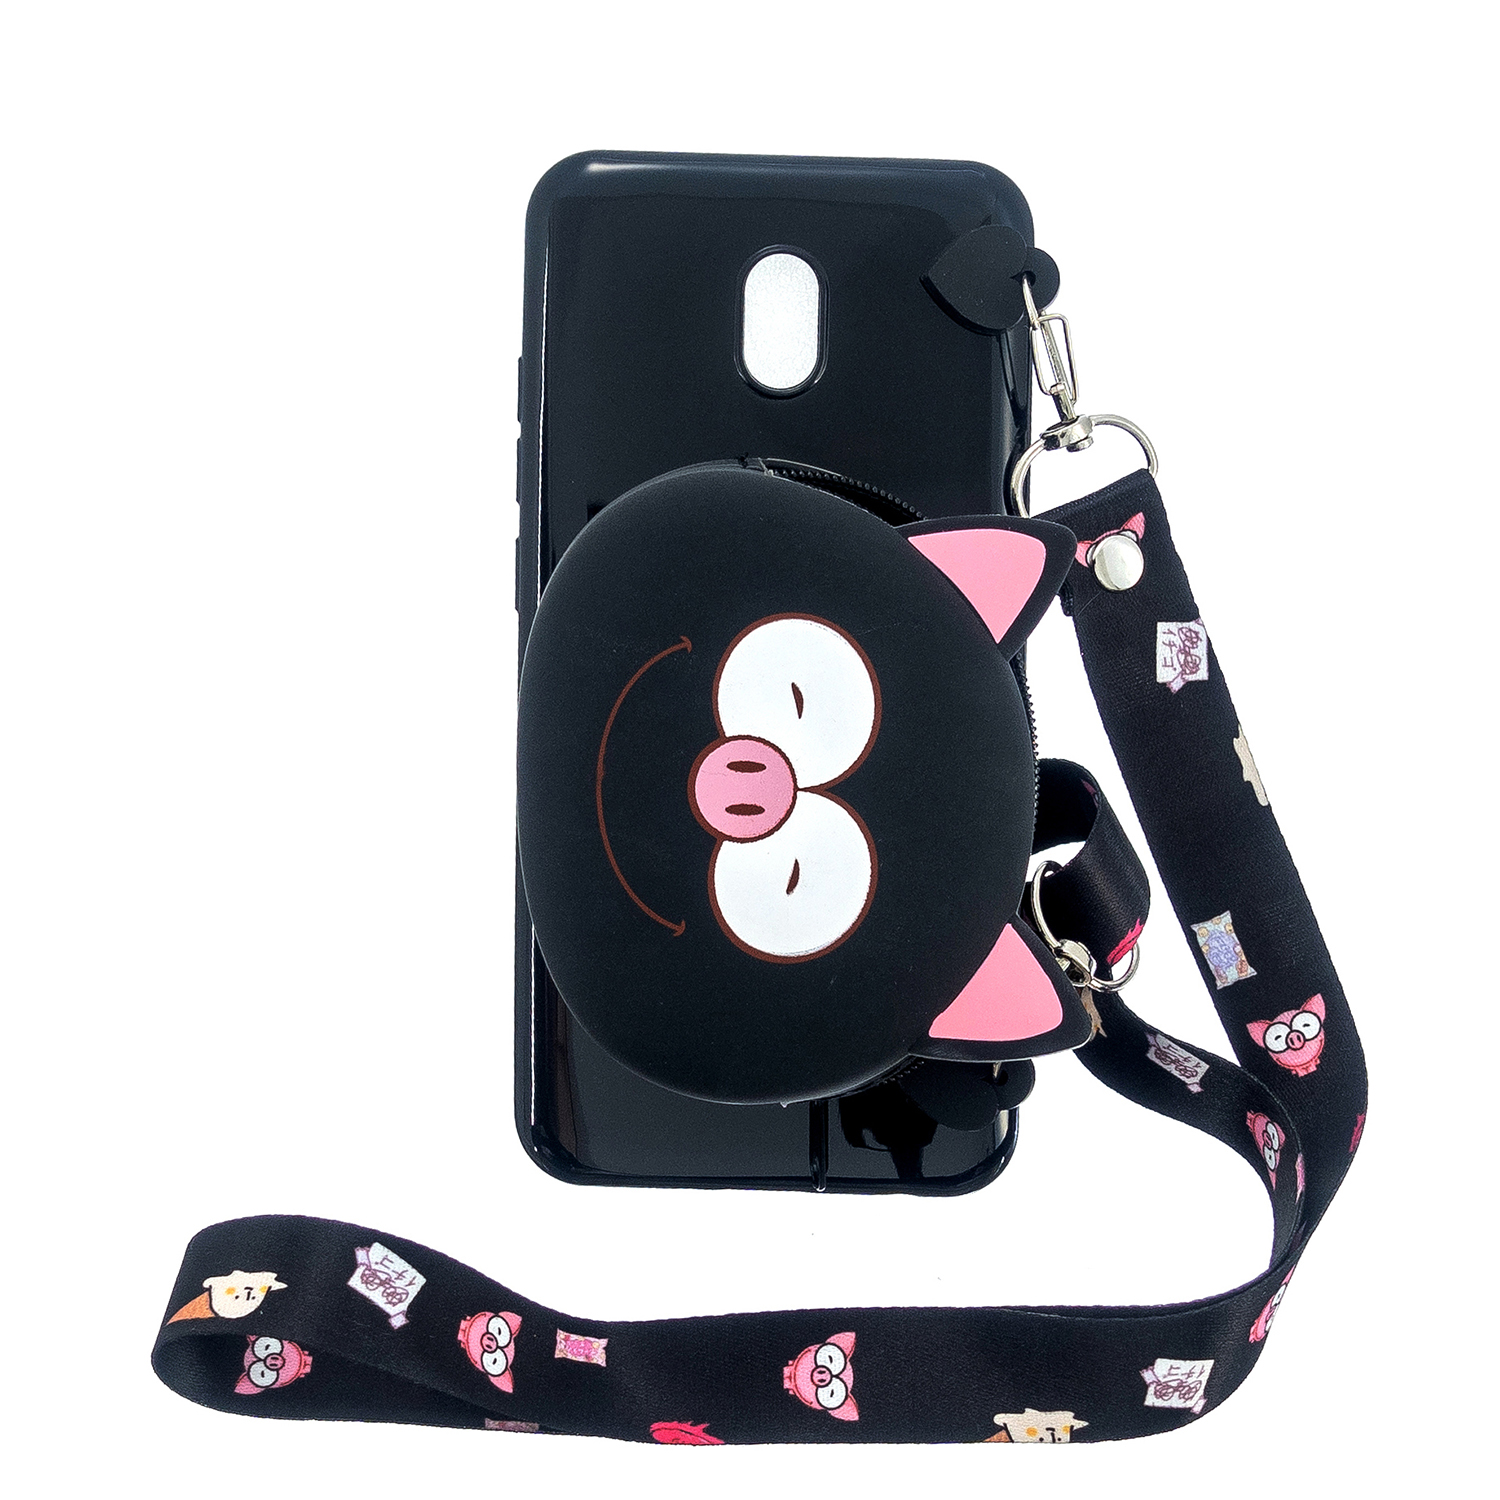 For Redmi 8/Redmi 8A Case Mobile Phone Shell Shockproof Cellphone TPU Cover with Cartoon Cat Pig Panda Coin Purse Lovely Shoulder Starp  Black